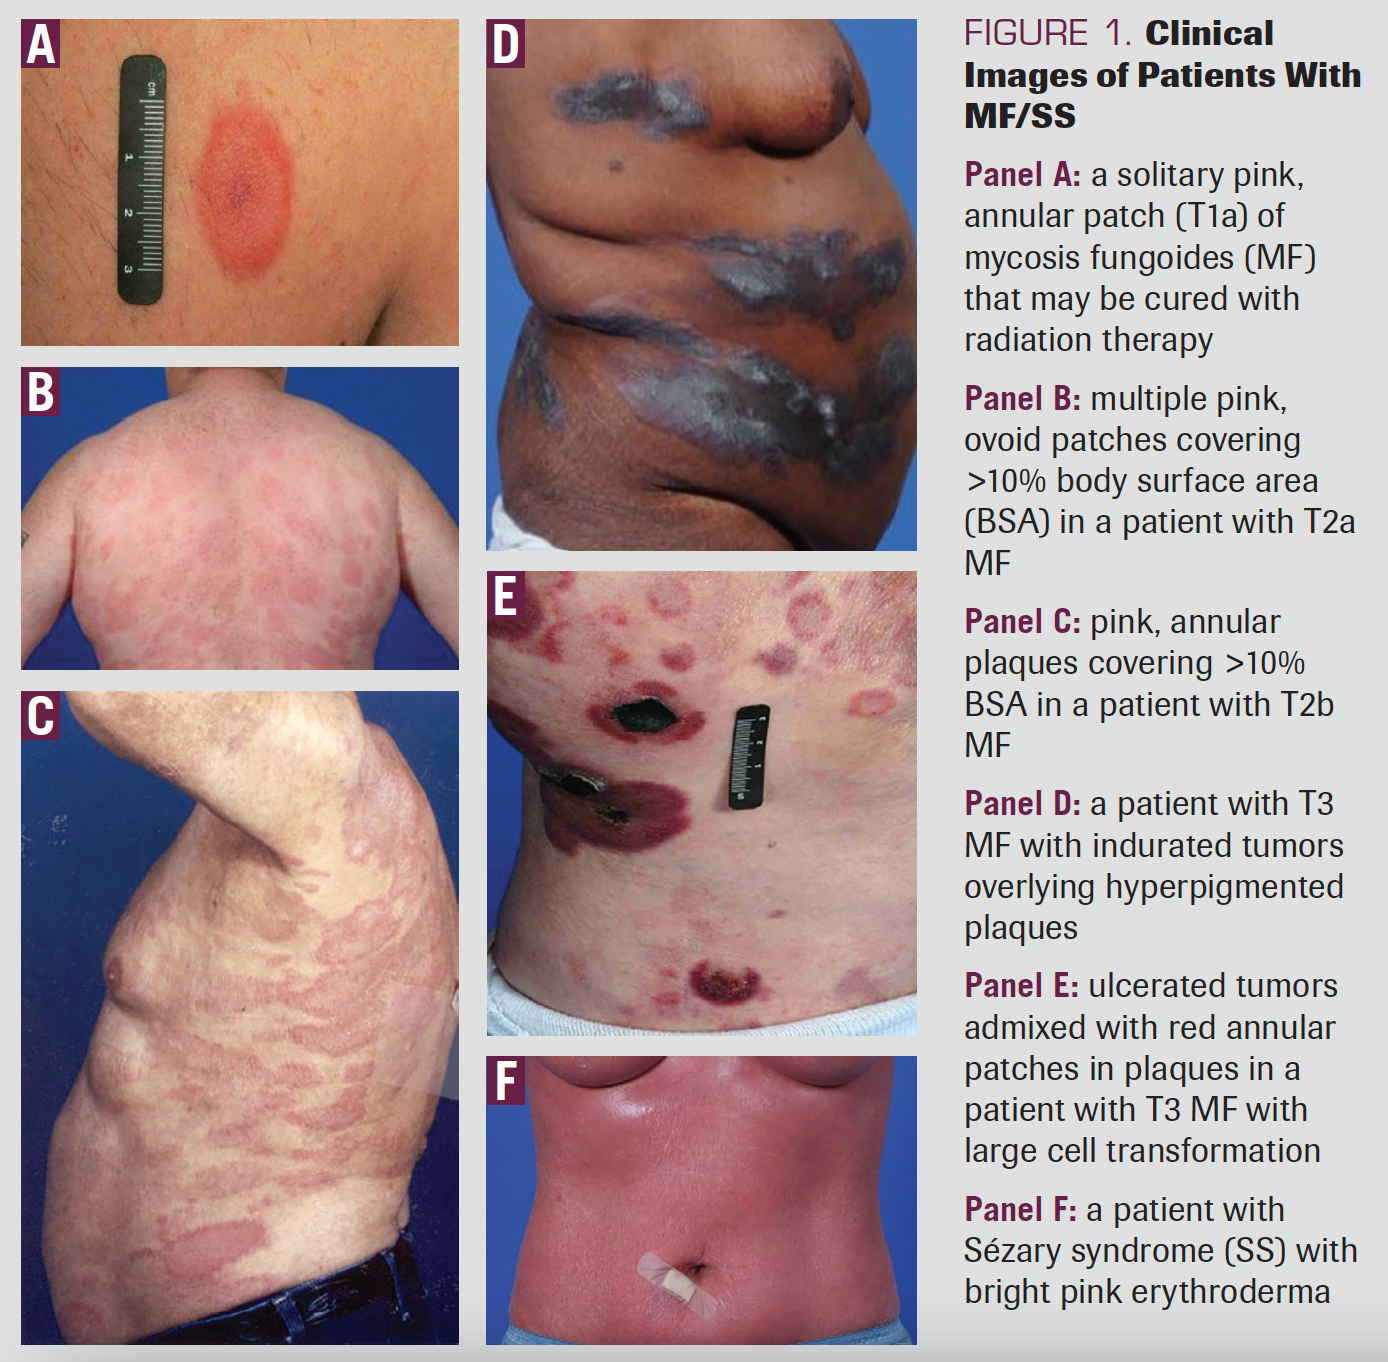 FIGURE 1. Clinical Images of Patients With MF/SS